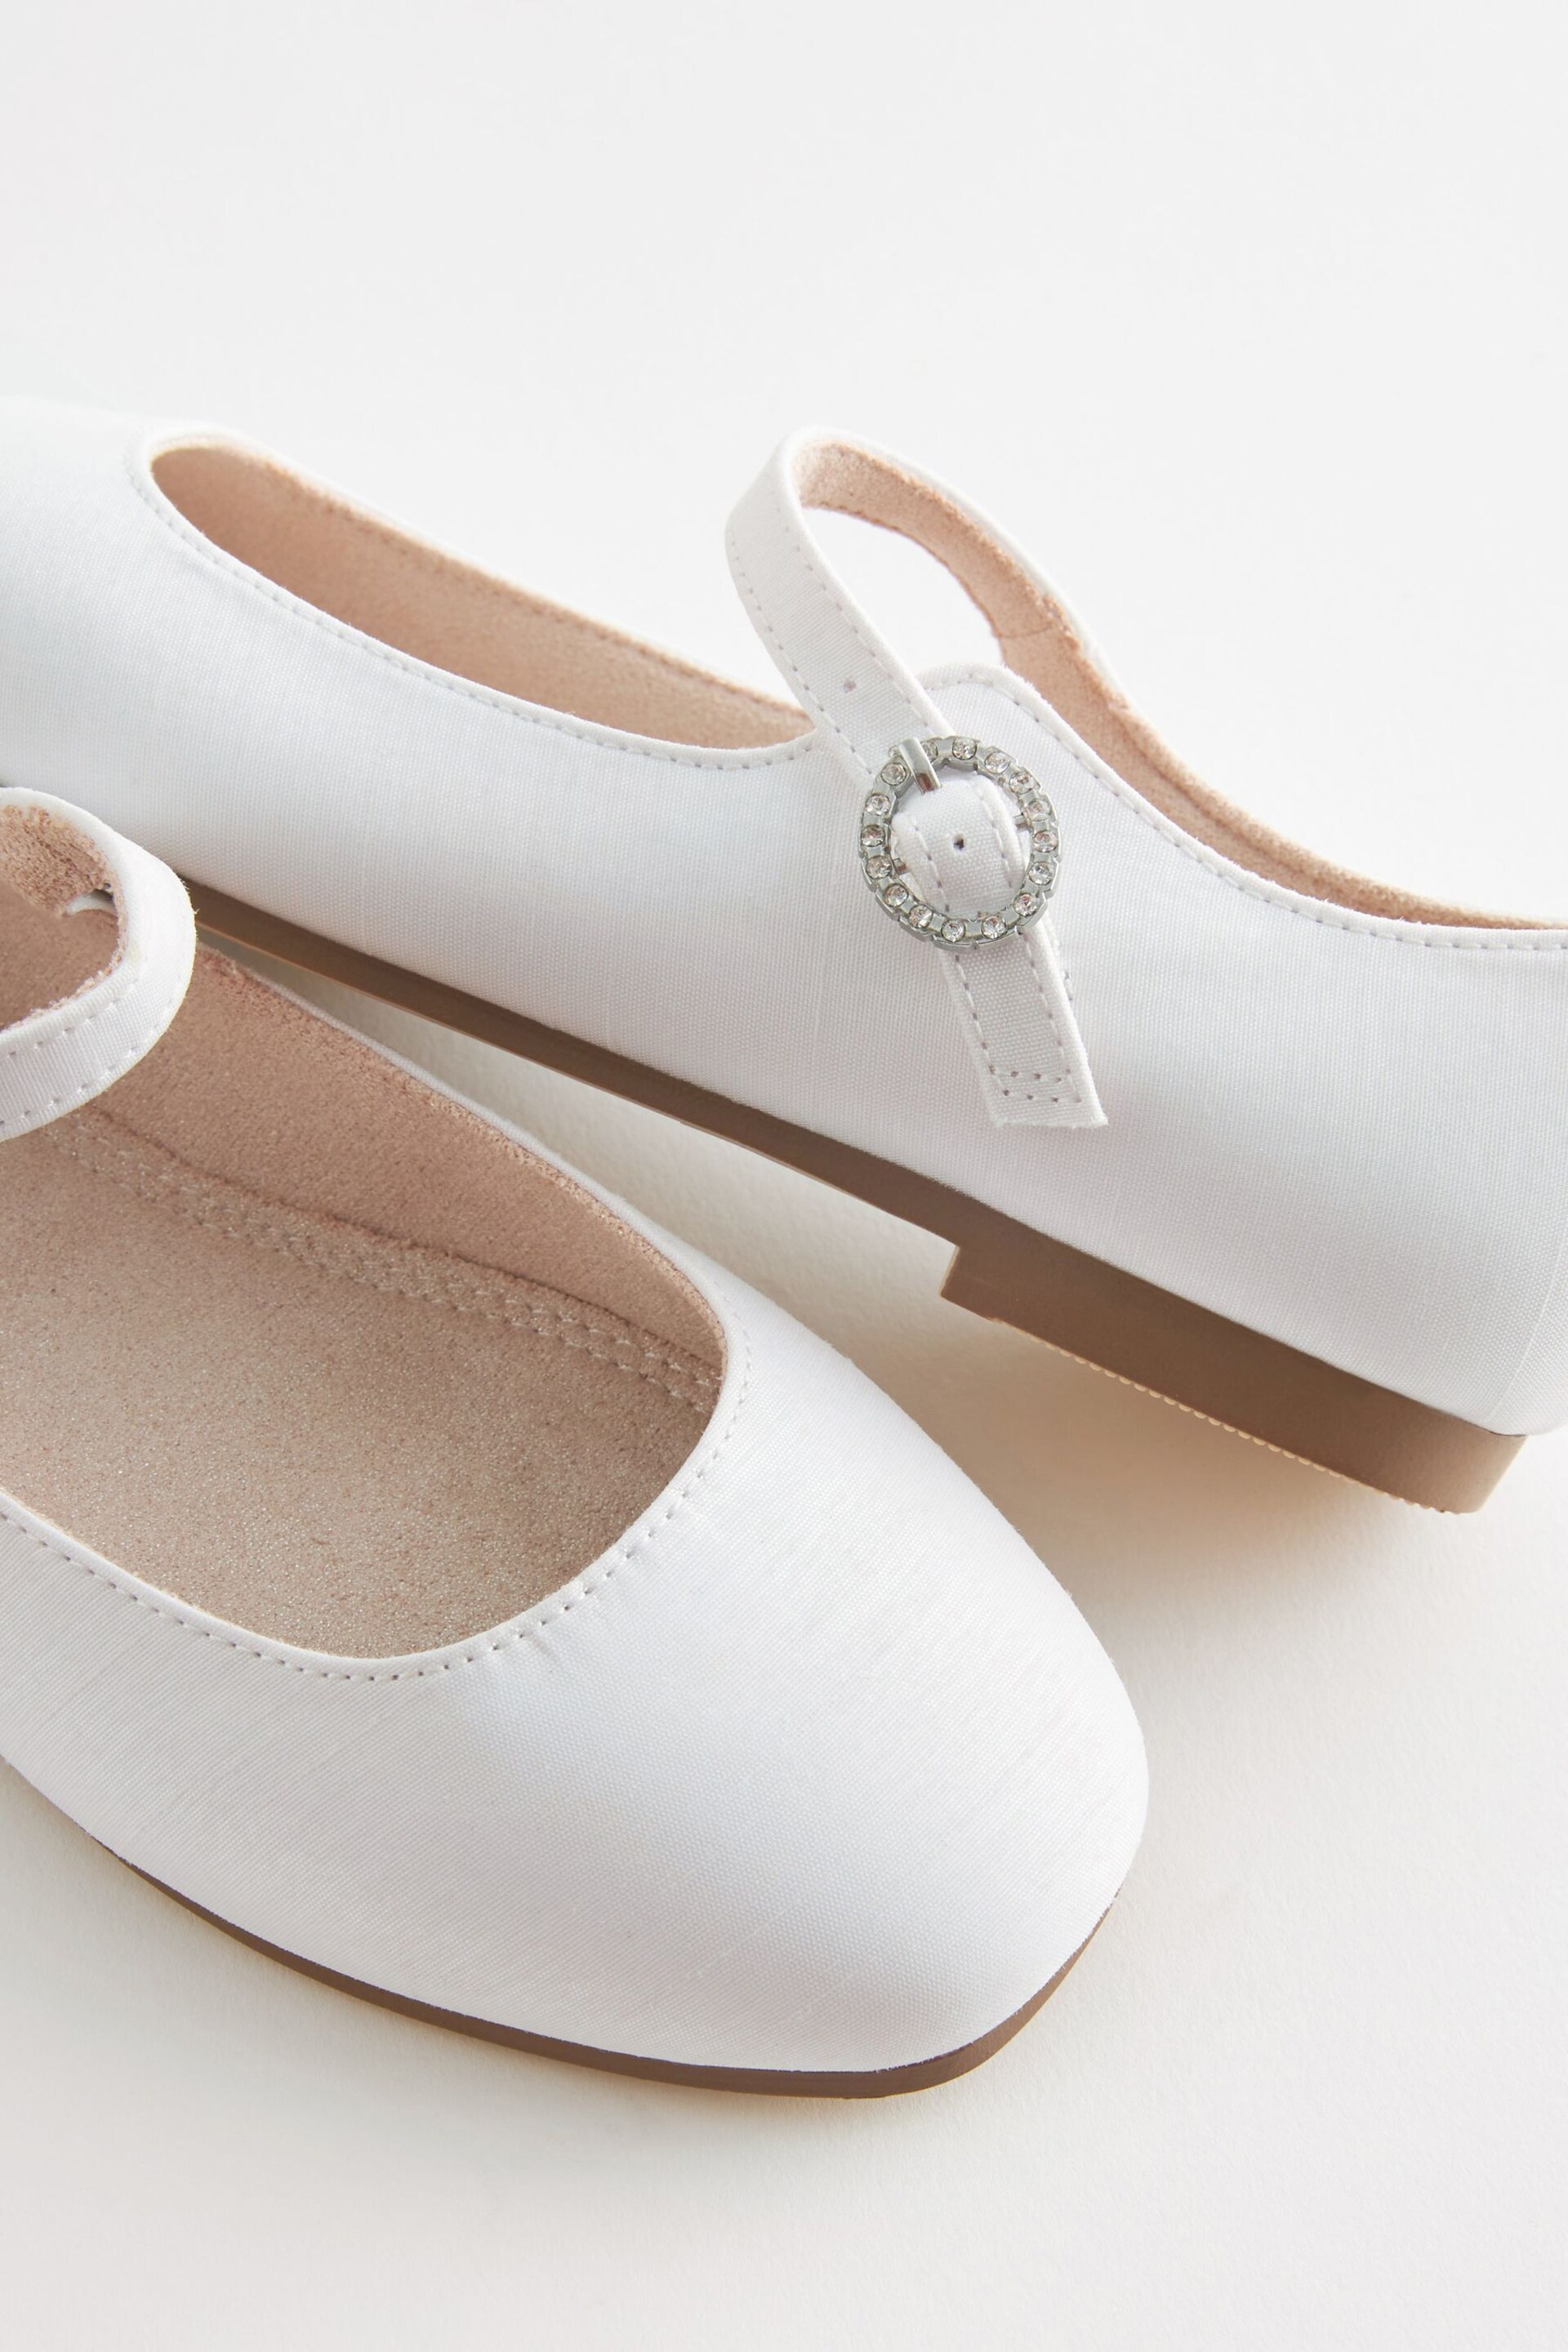 White Satin (Stain Resistant) Standard Fit (F) Square Toe Mary Jane Occasion Shoes - Image 5 of 6